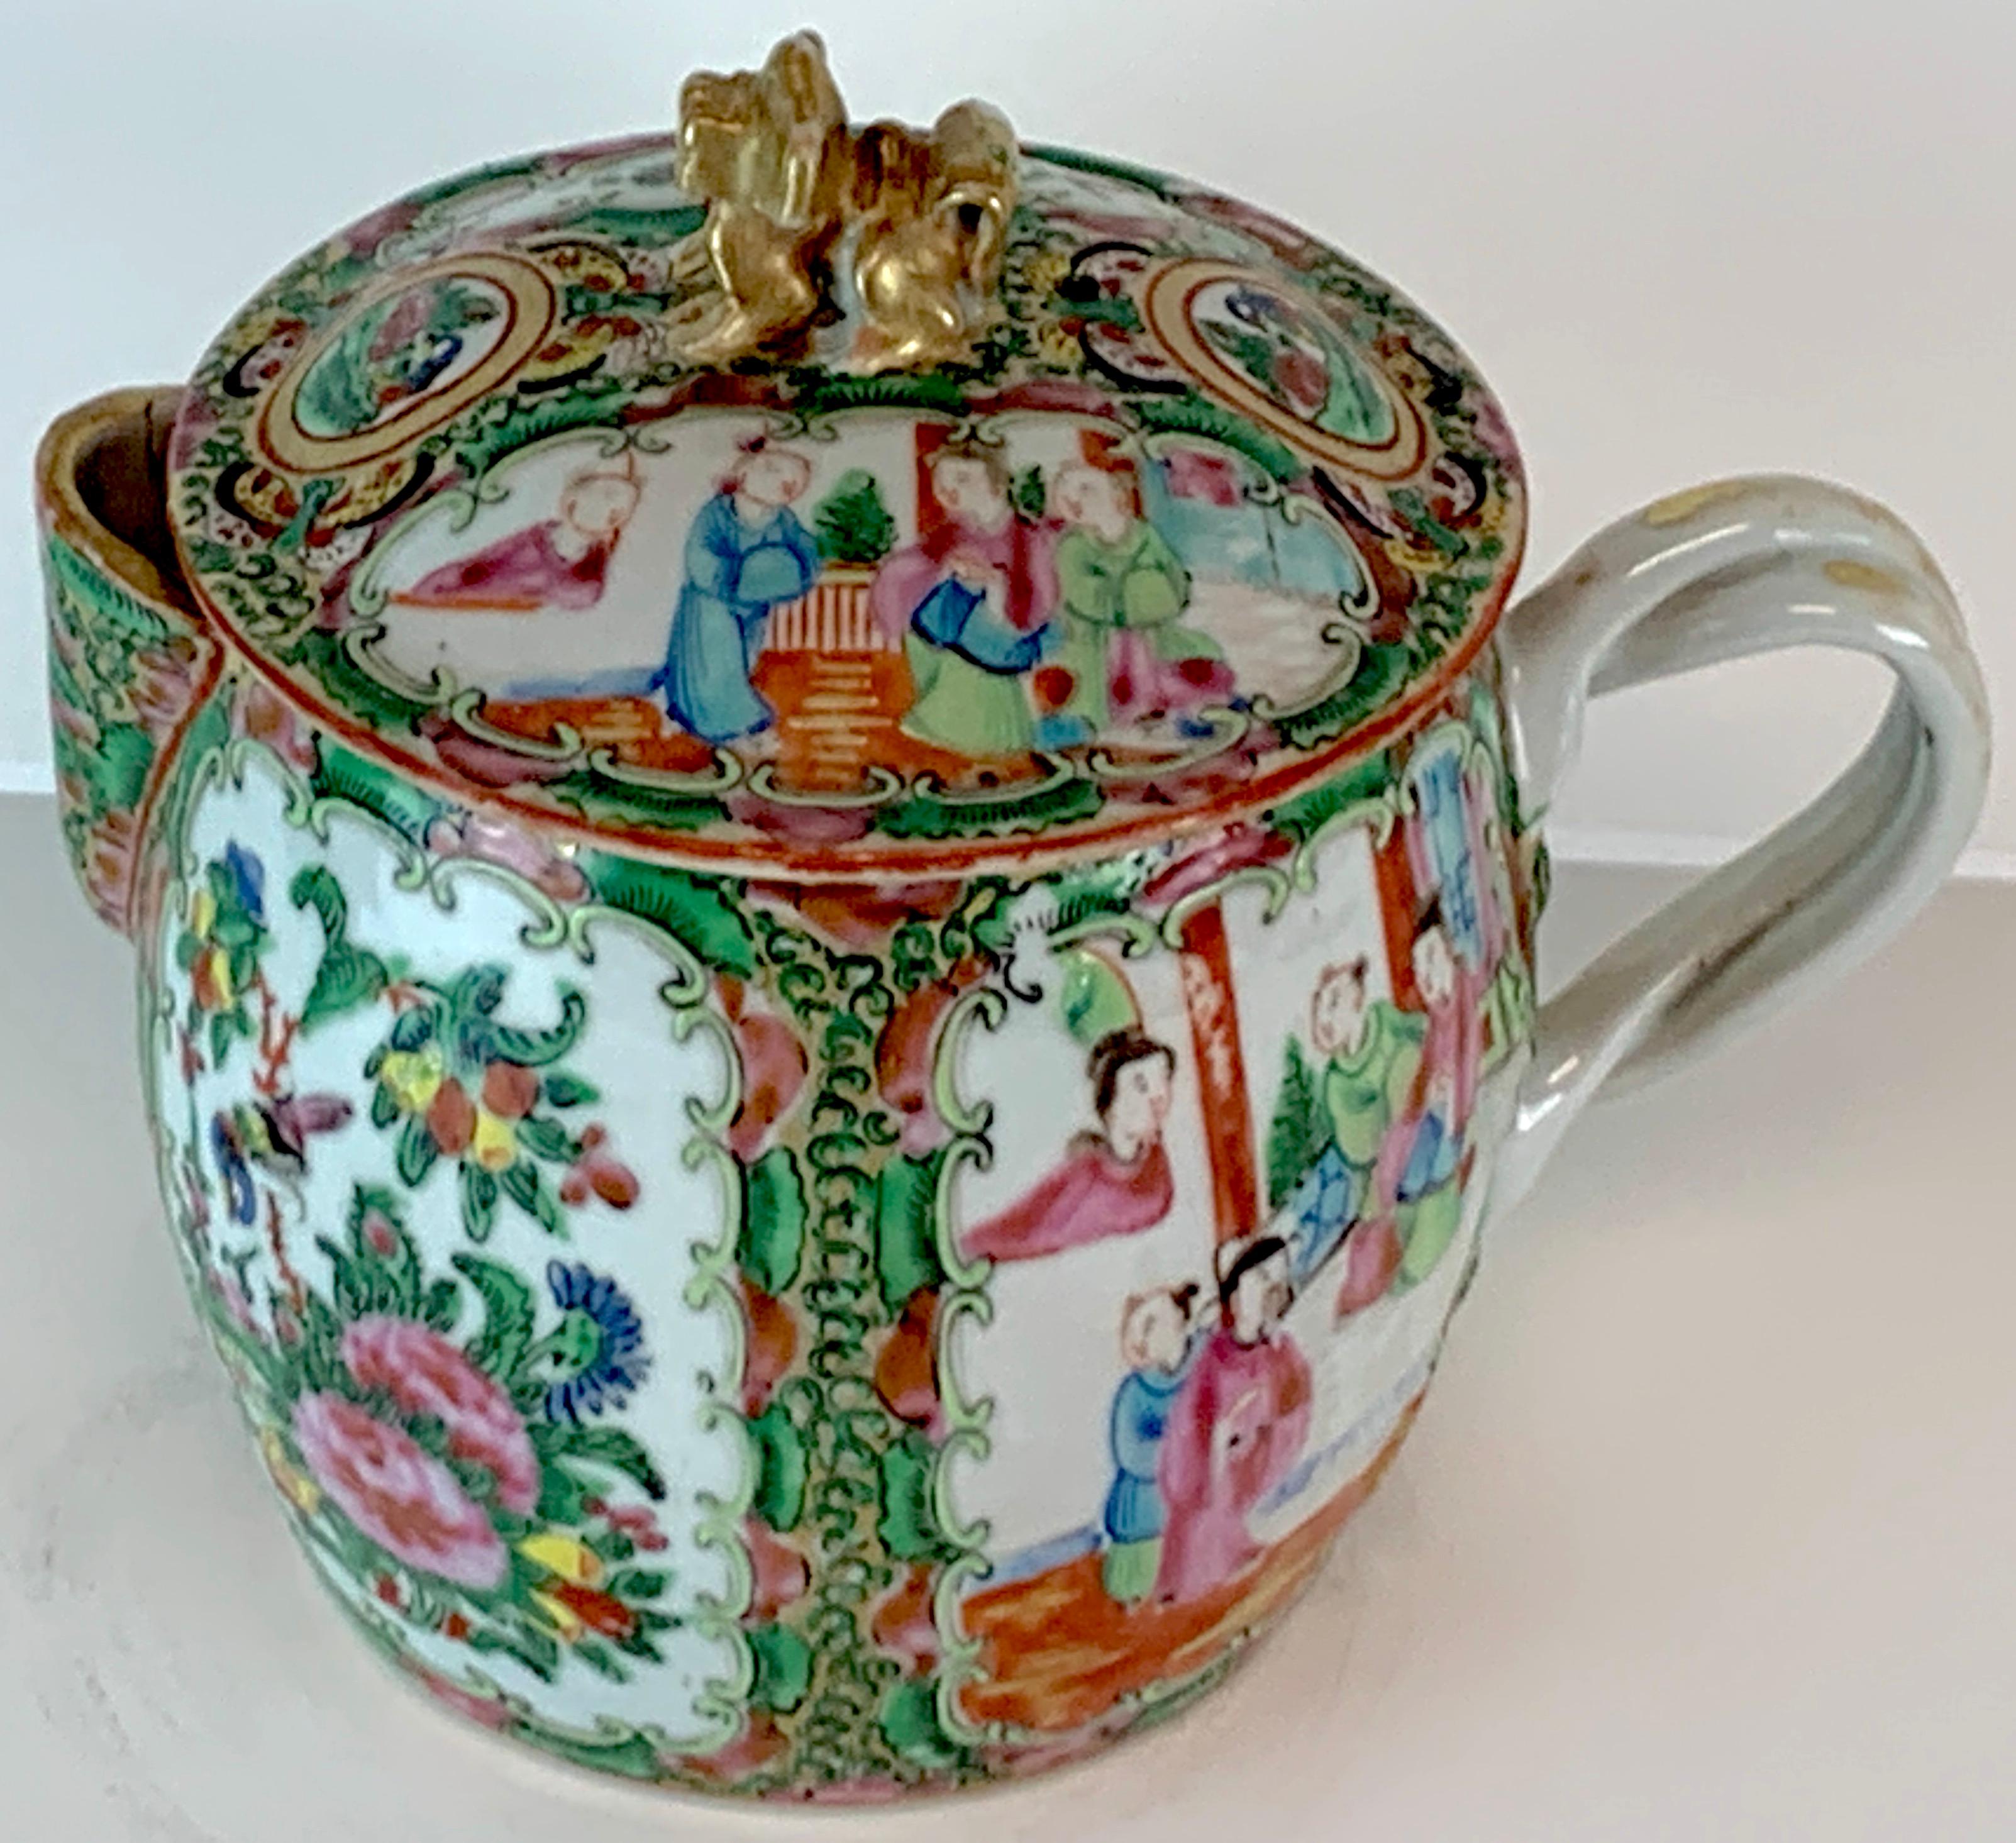 19th century rose medallion cider pitcher with foo dog finial, Nicely decorated in a diminutive size, twisted gilt handles, complete with original cover. Good color. No chips, cracks or repairs.
  